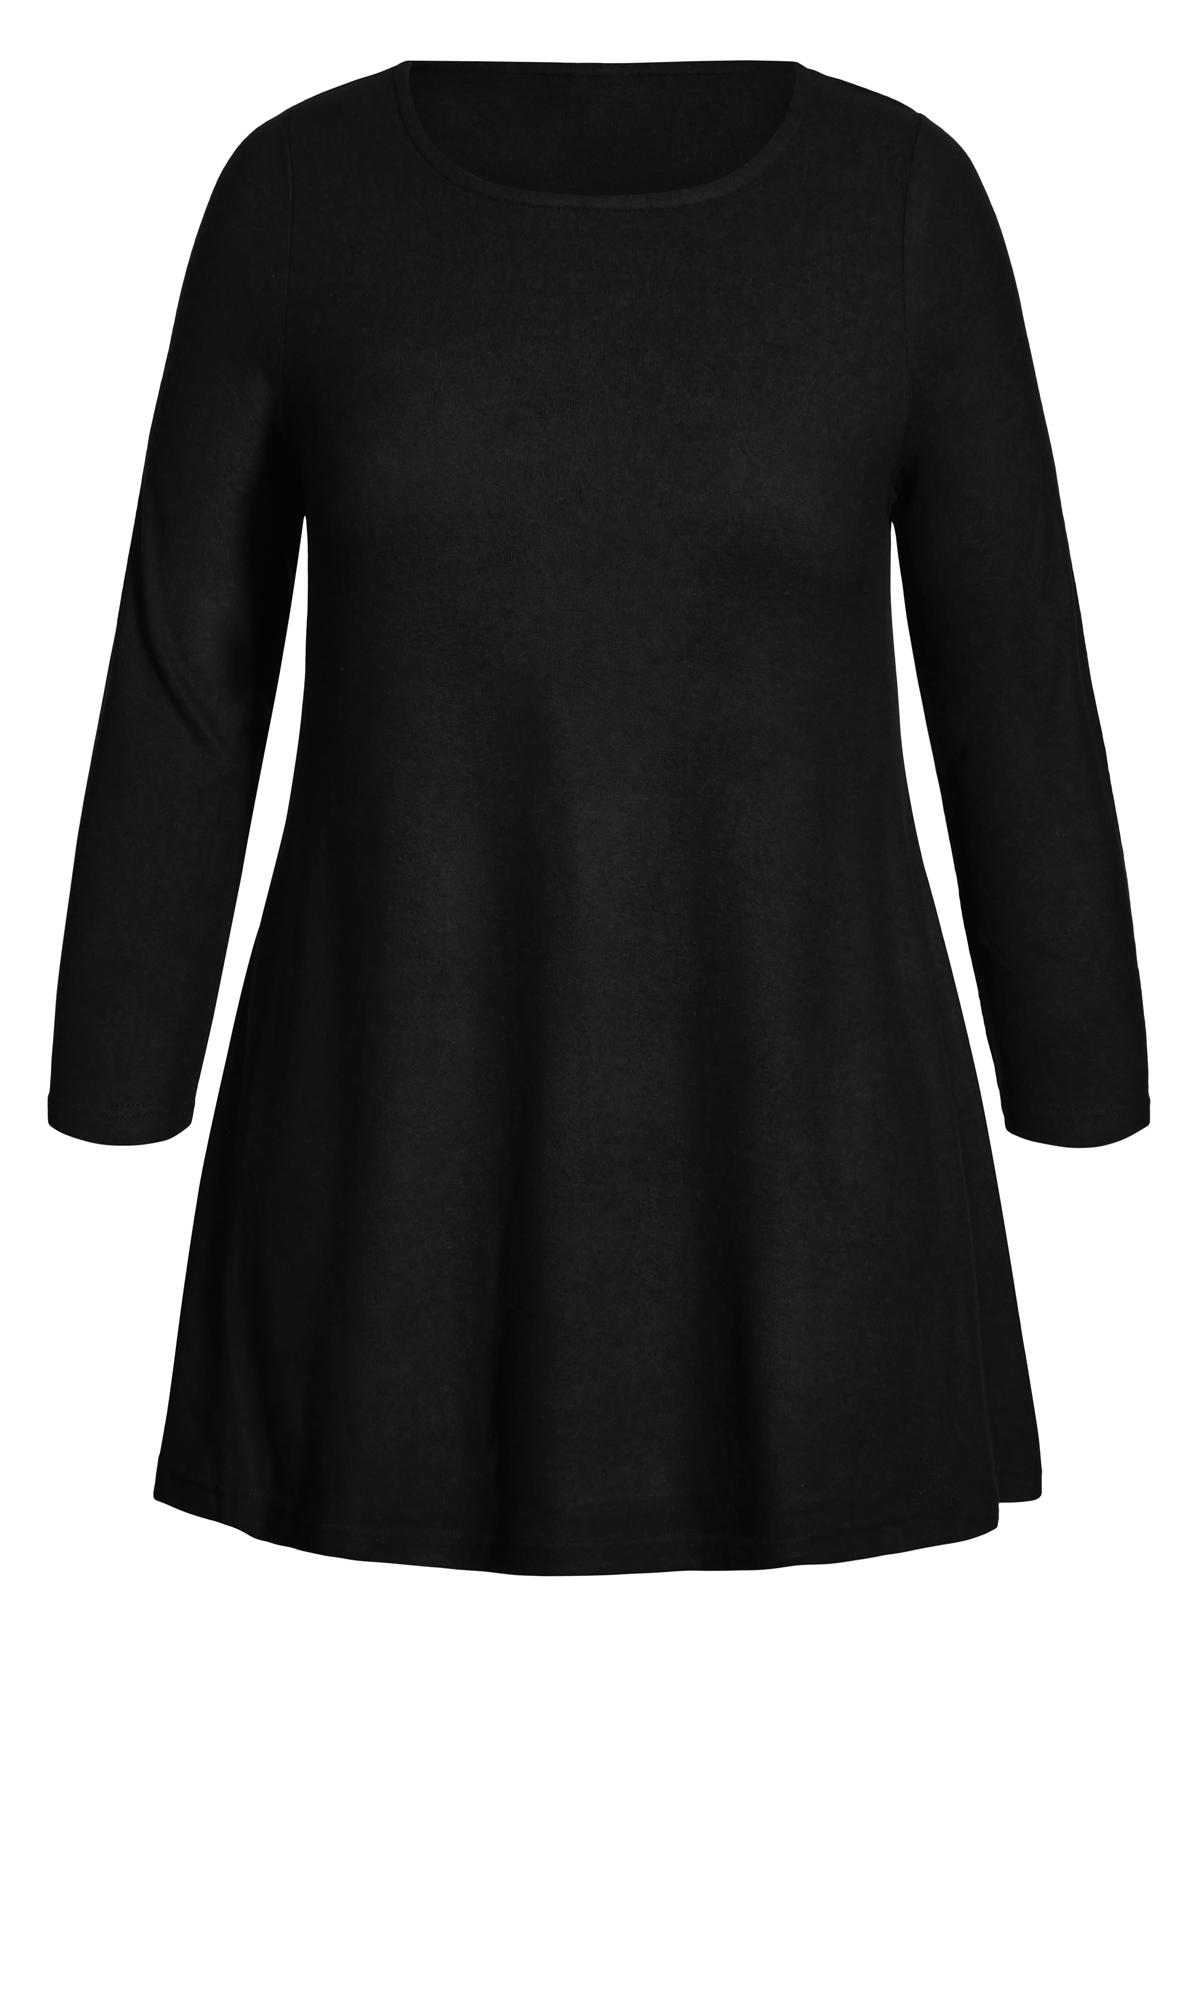 Soft Touch Black Tunic | Evans